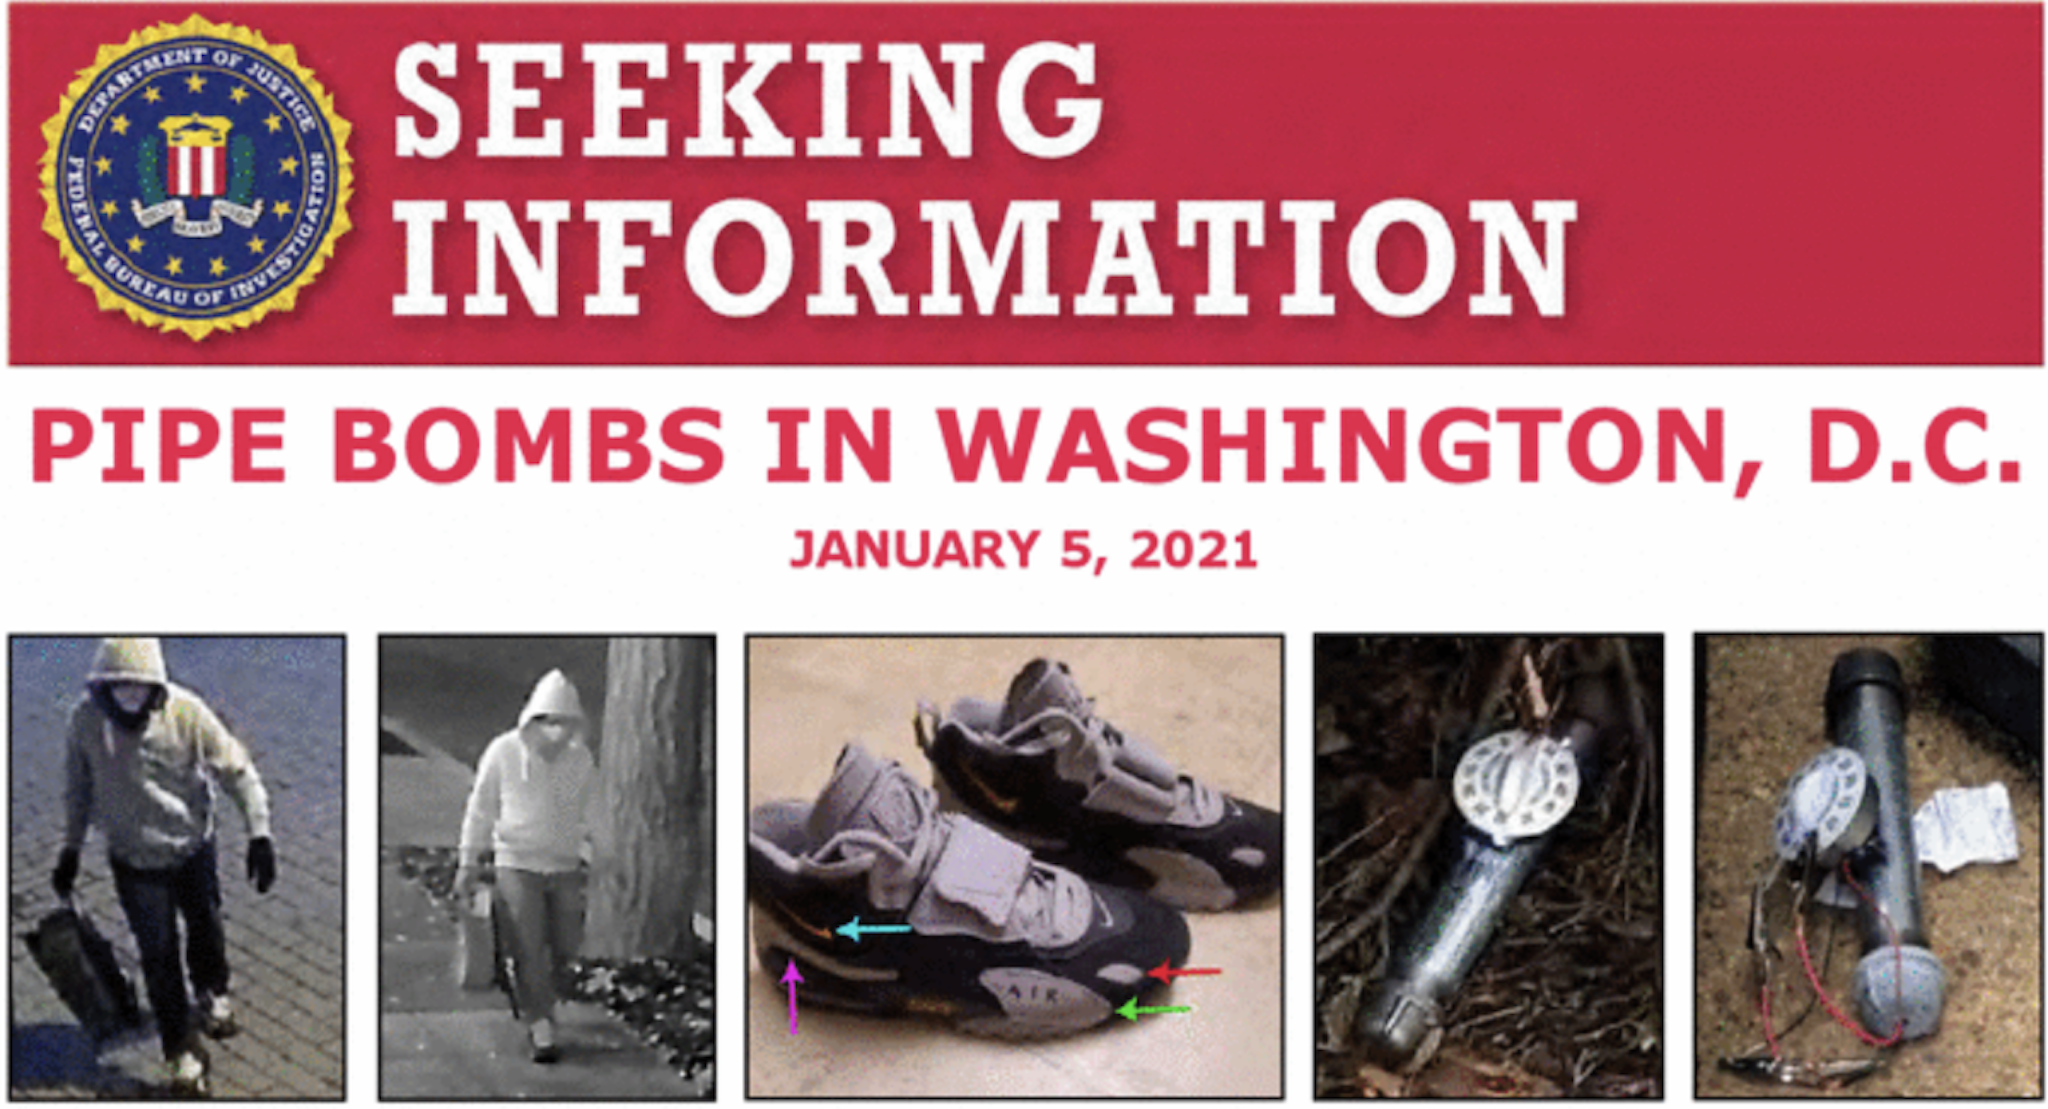 Photos released by the FBI of the person who they say planted bombs on January 5, 2021 / FBI